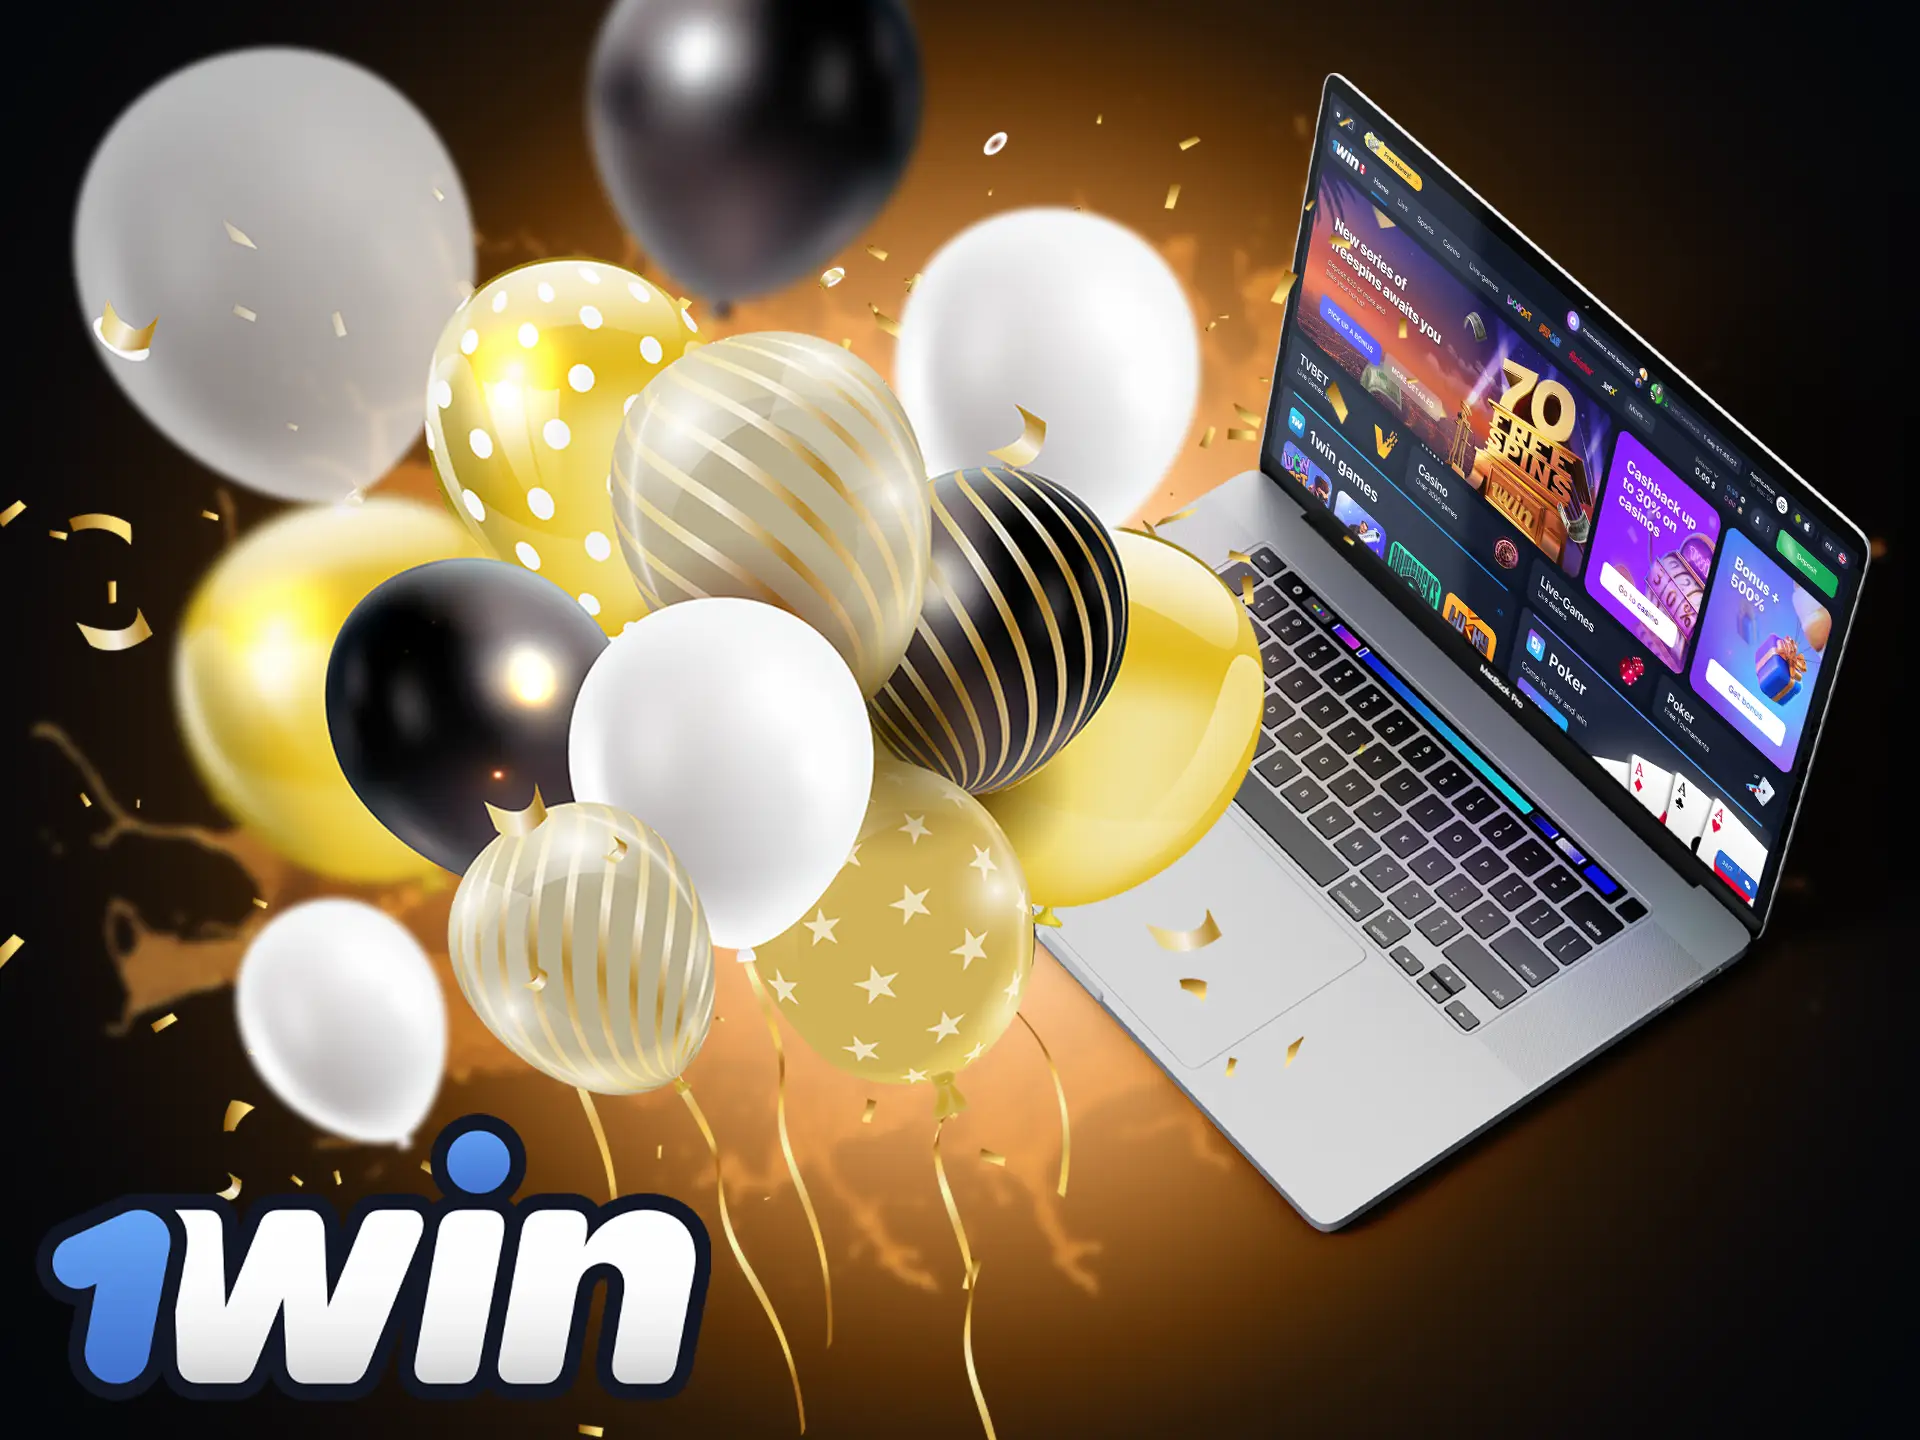 Get nice compliments right while playing on the 1Win PC platform.